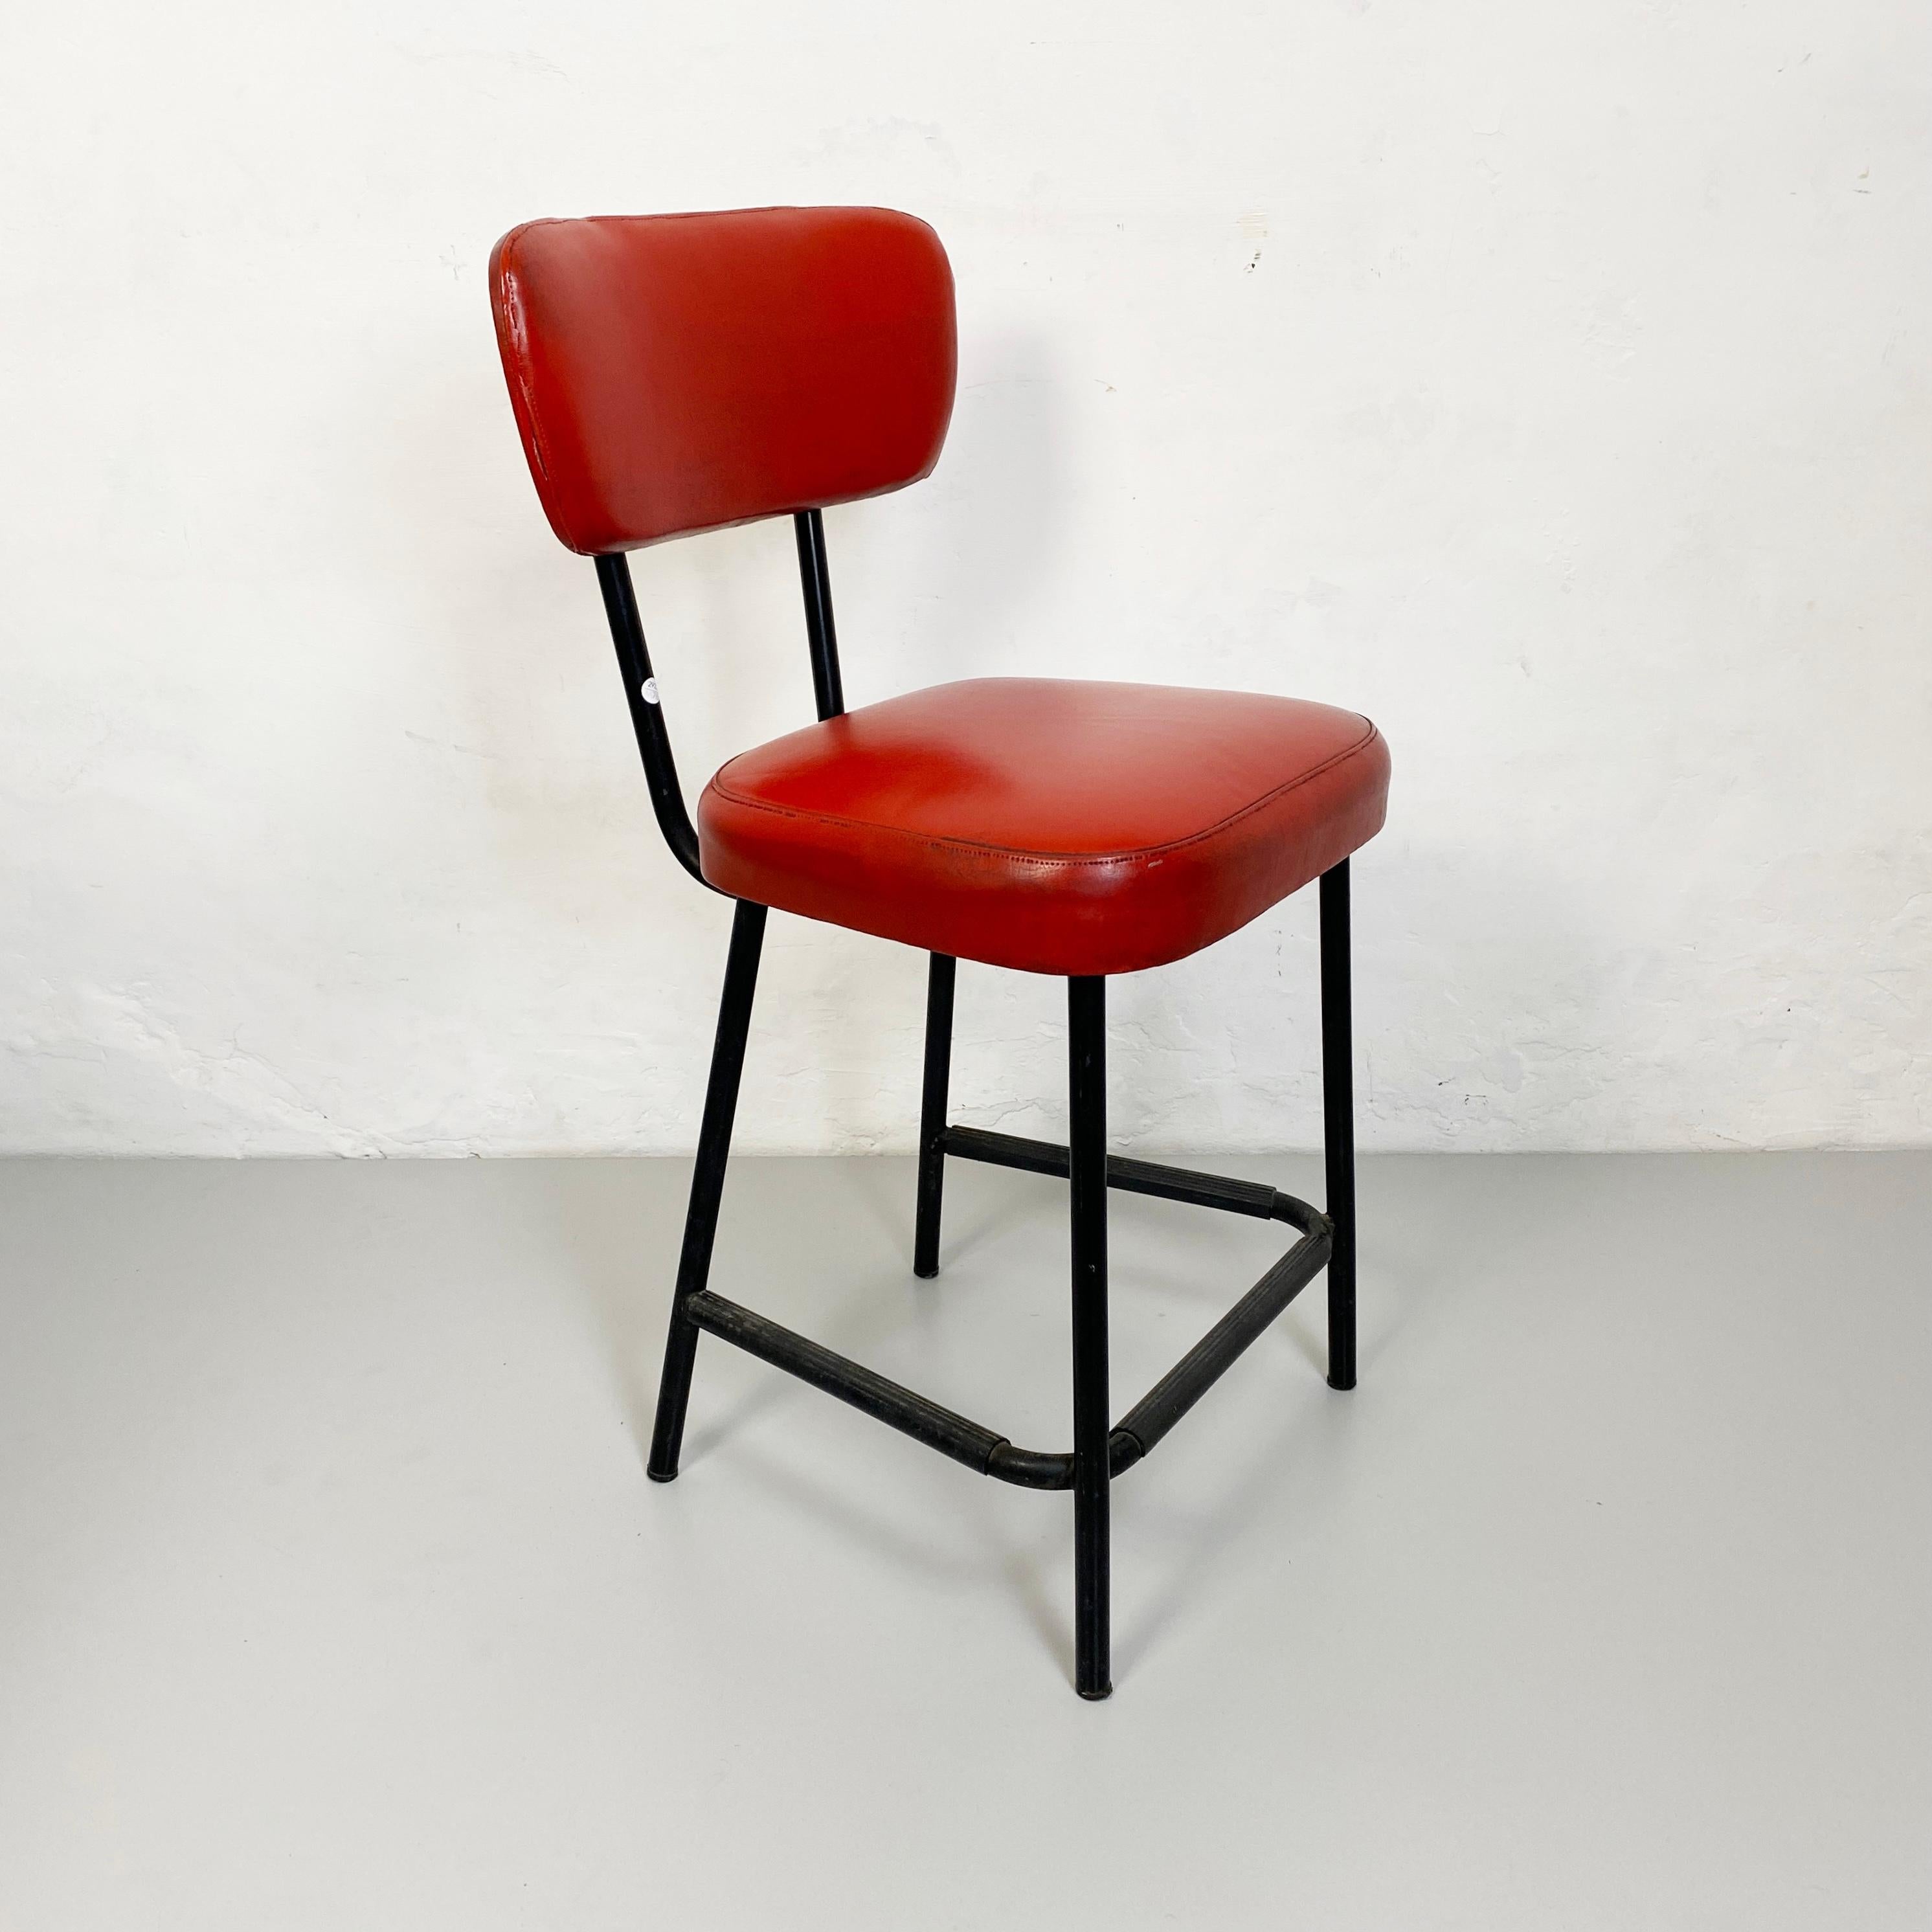 Mid-Century Modern Italian Mid-Century Red Sky and Metal Chair, 1960s